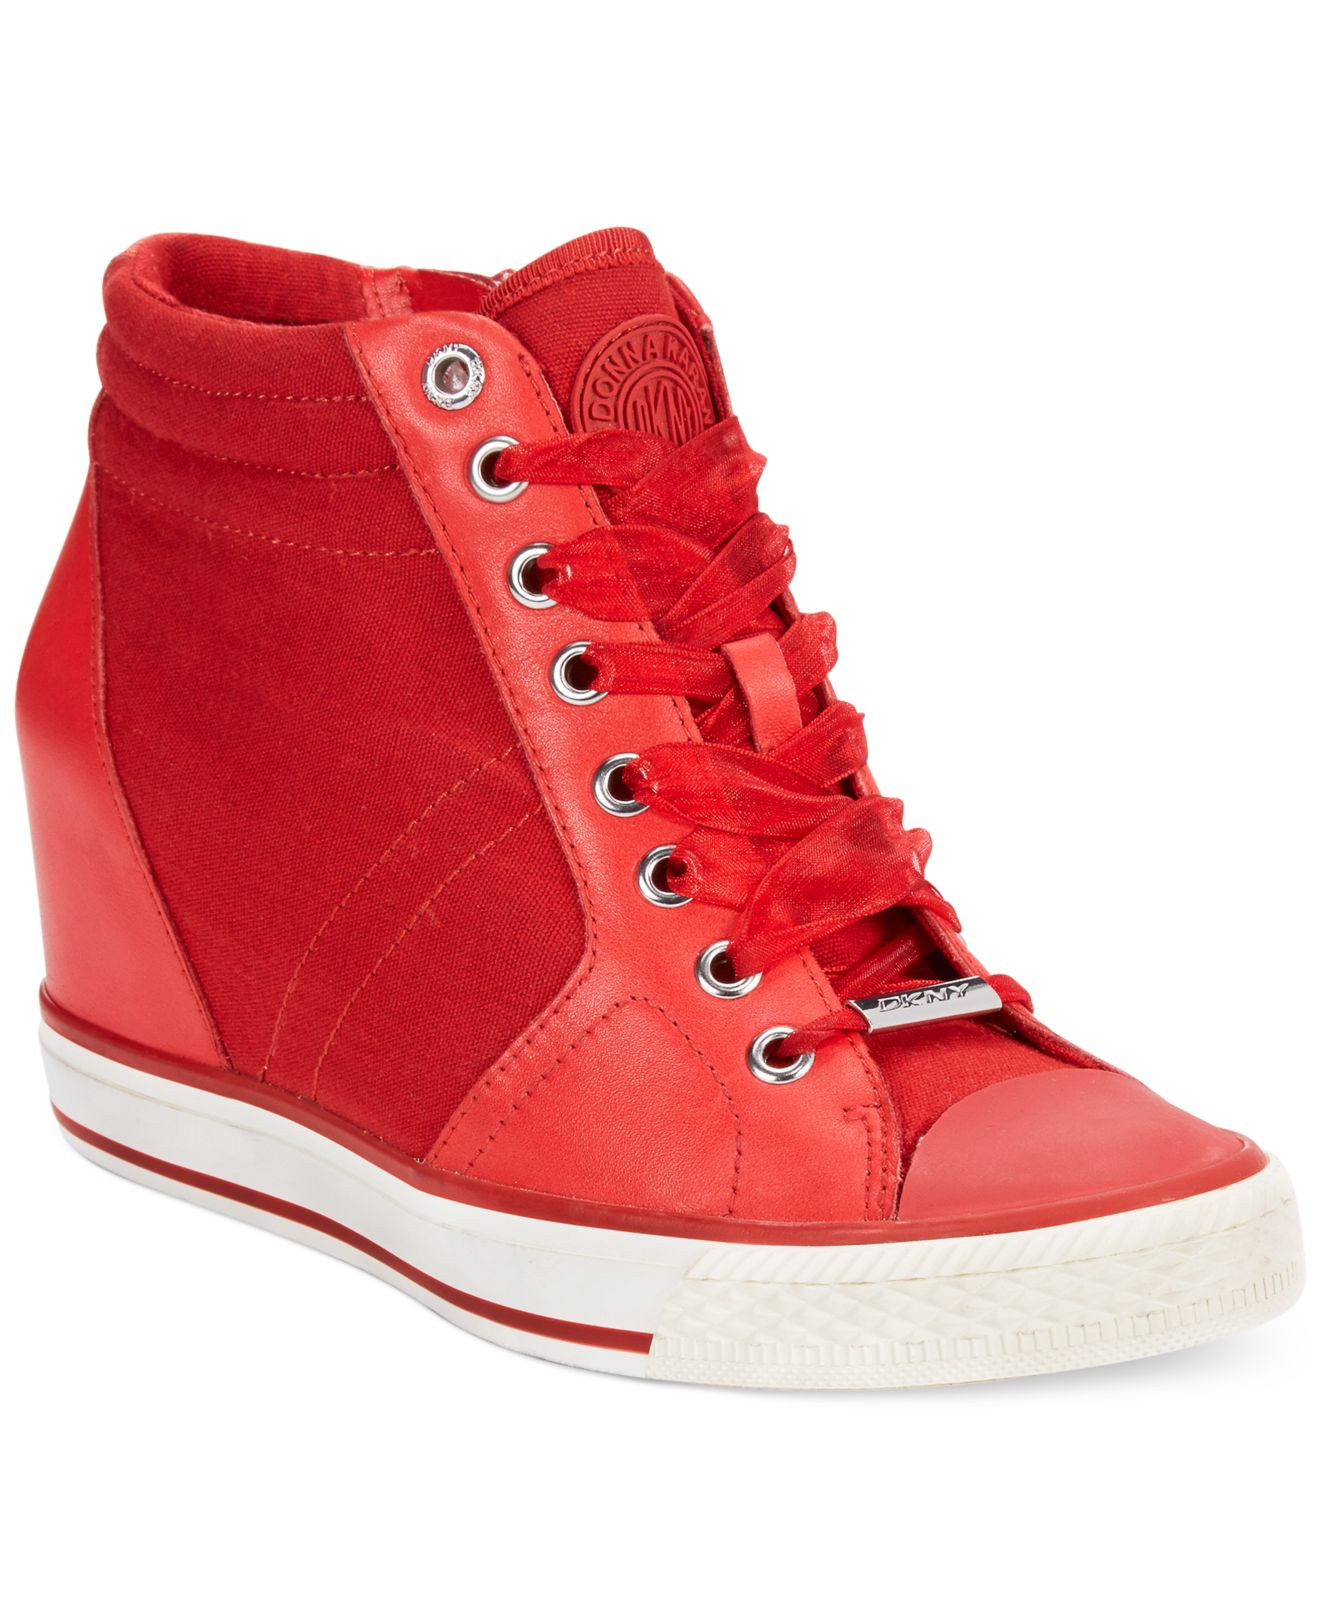 Shoes Stores Near Me: Women S Wedge Sneakers